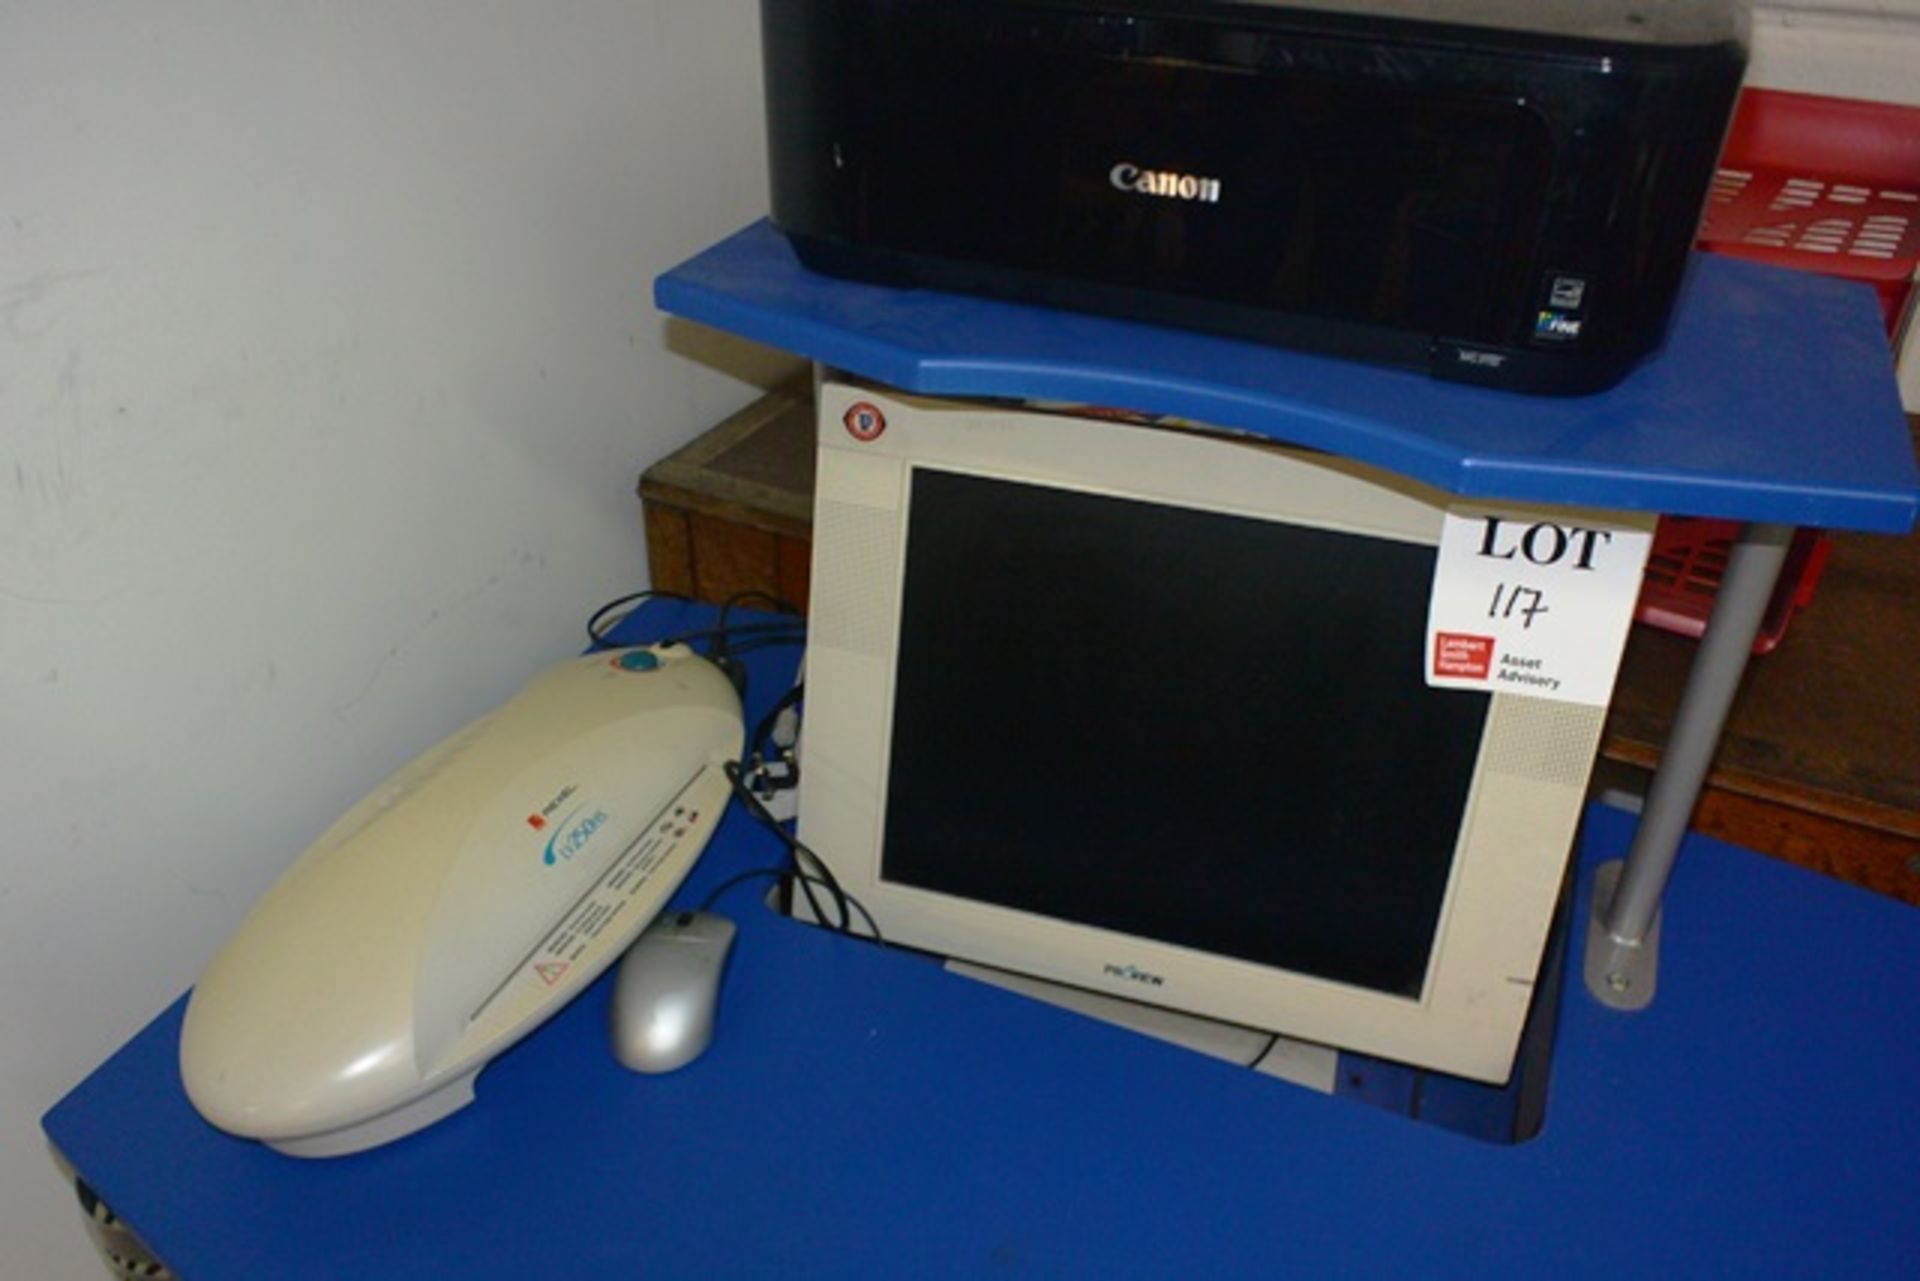 Desktop PC (Please note: No Hard drive included, LCD monitor, keyboard, mouse, Canon inkjet